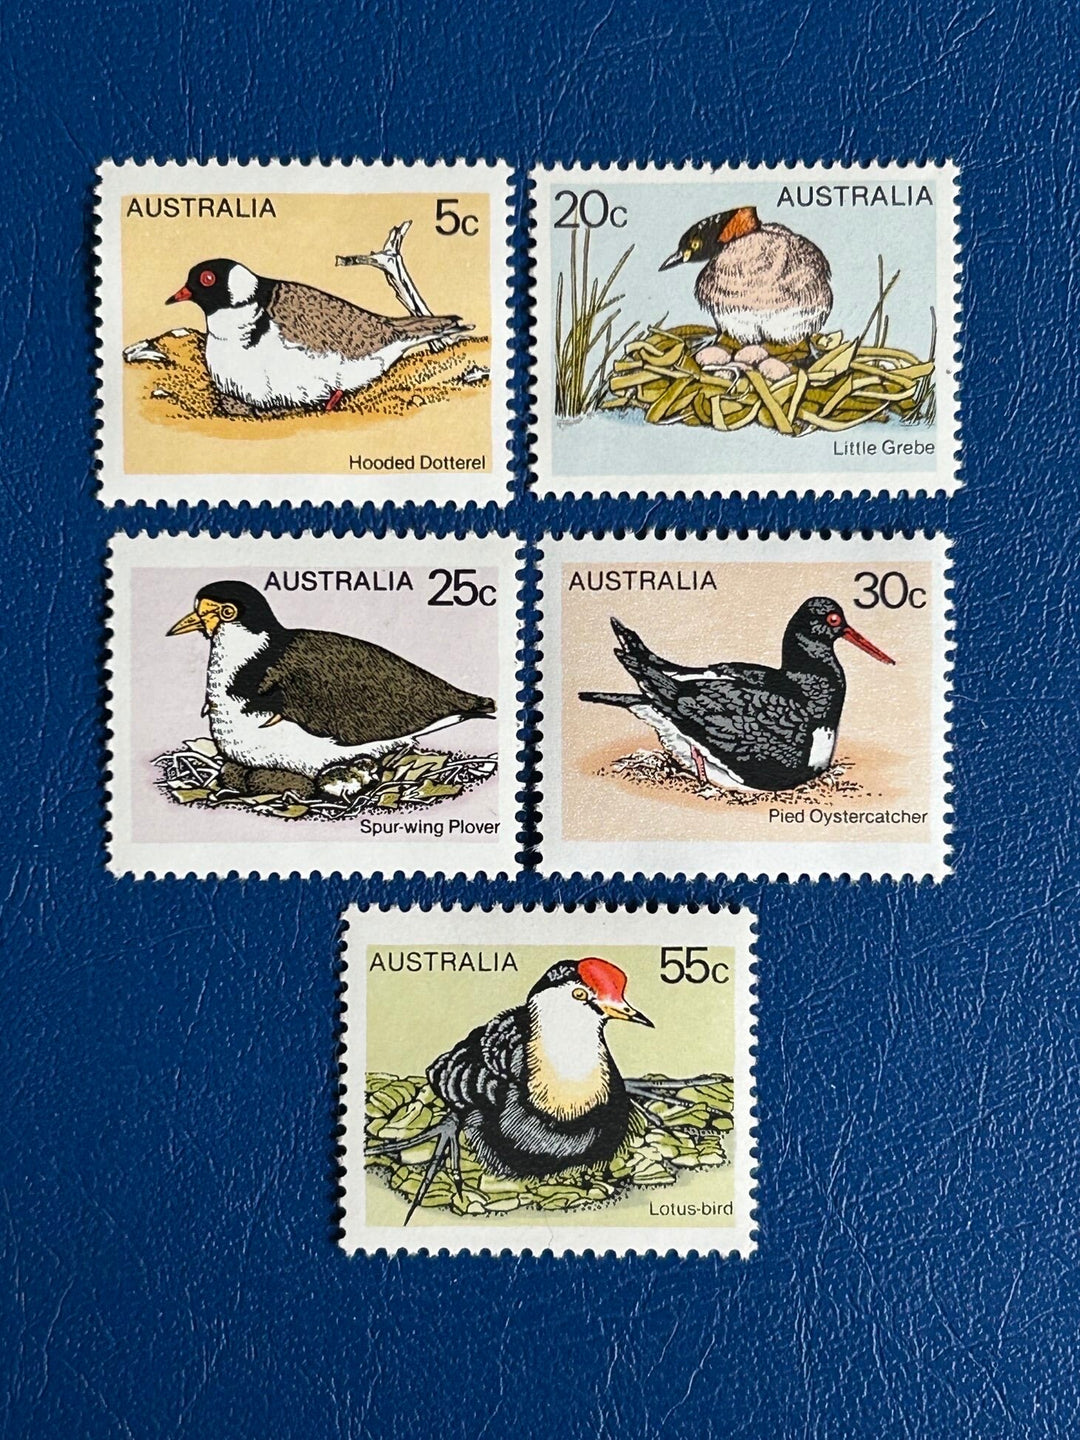 Australia - Original Vintage Postage Stamps - 1978 - Birds: Series One - for the collector, artist or crafter